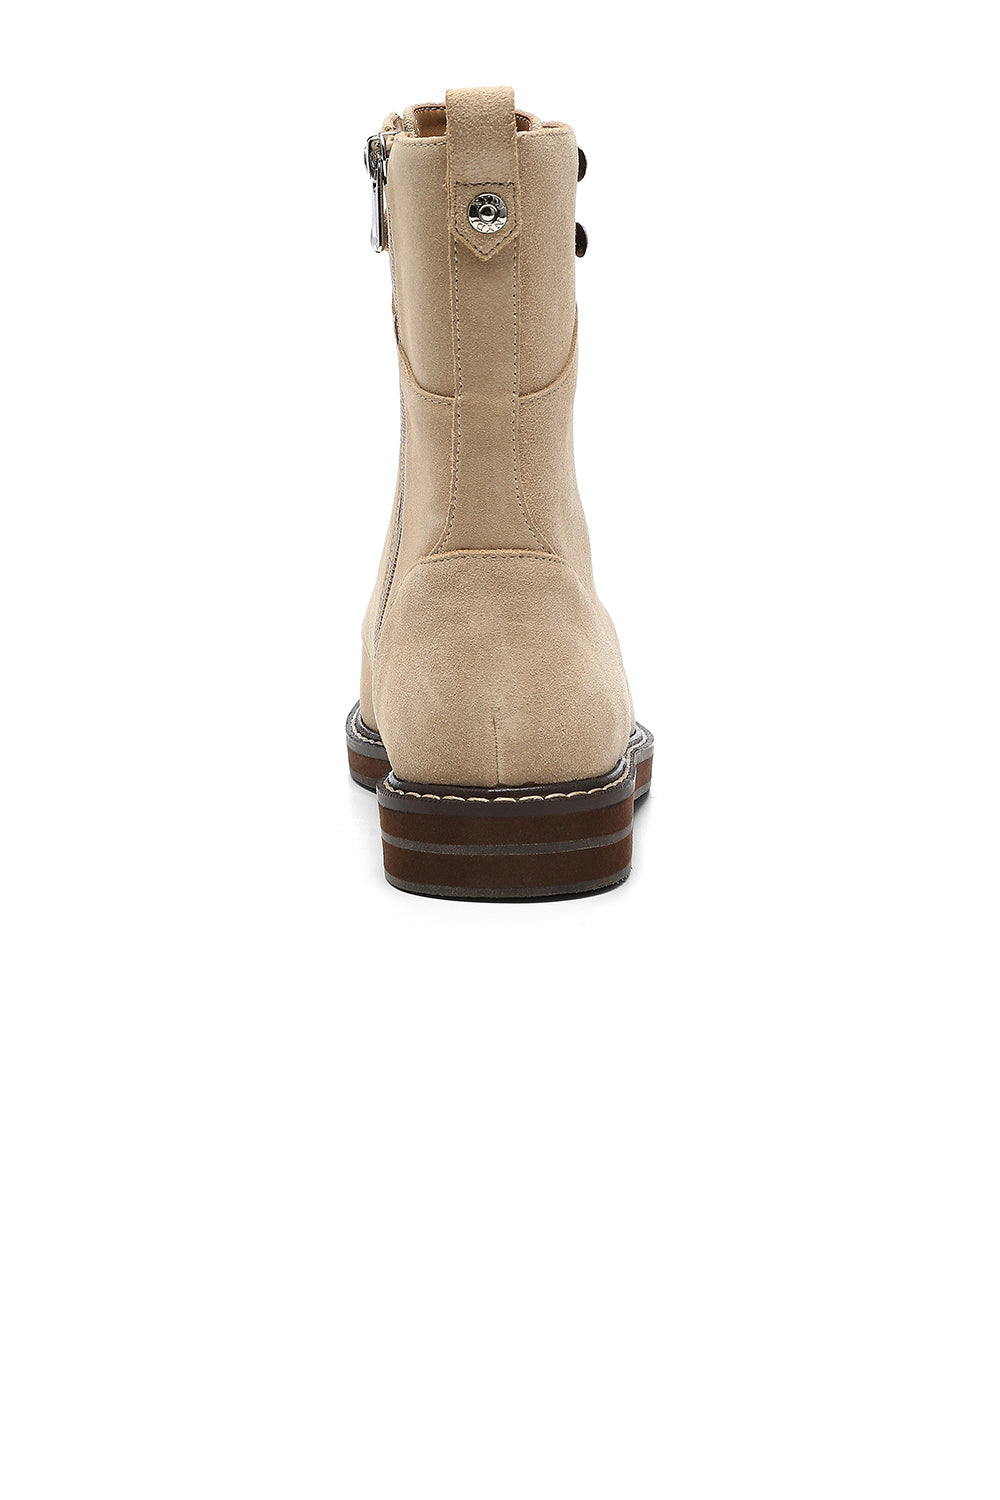 NYDJ Estella Lace-Up Boots In Calf Suede - Sand